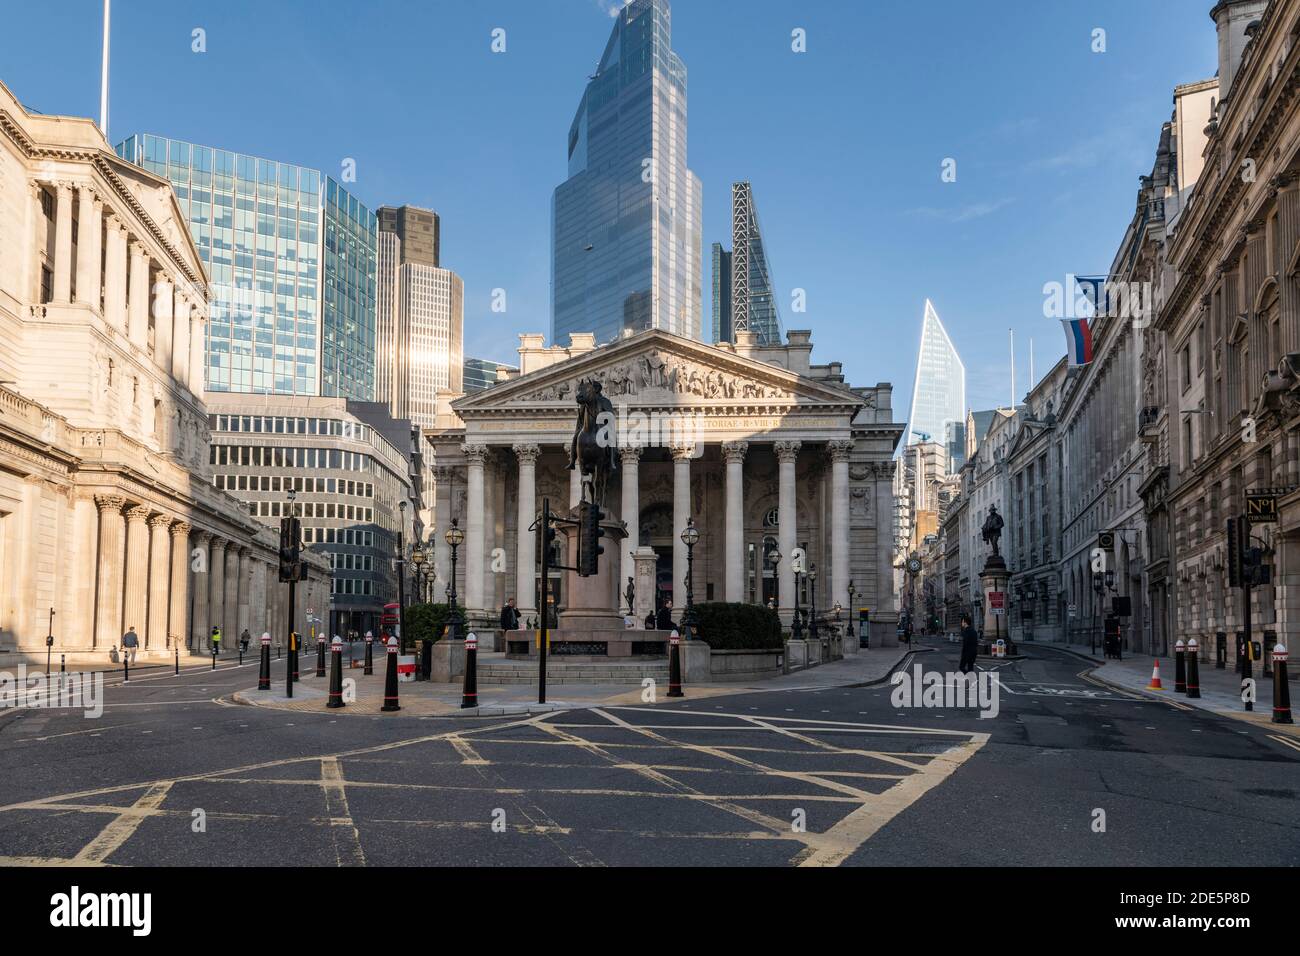 Royal Exchange and Bank of England with empty roads and quiet streets with almost no people during the Coronavirus pandemic Covid-19 lockdown, taken at rush hour, City of London, England, Europe Stock Photo